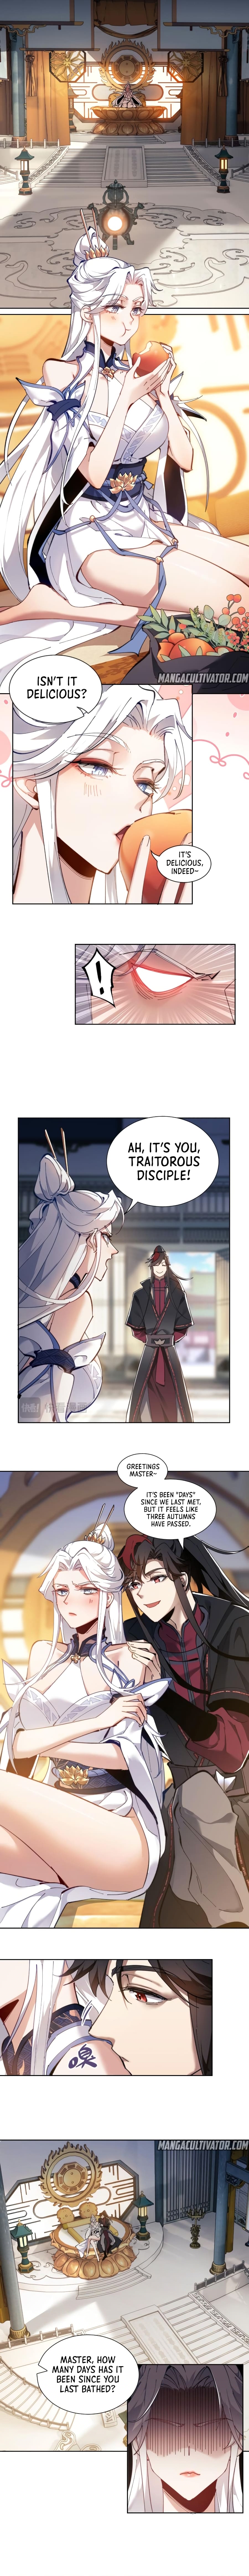 Master: This rebellious disciple is definitely not the Holy Son Chapter 4 - Page 5